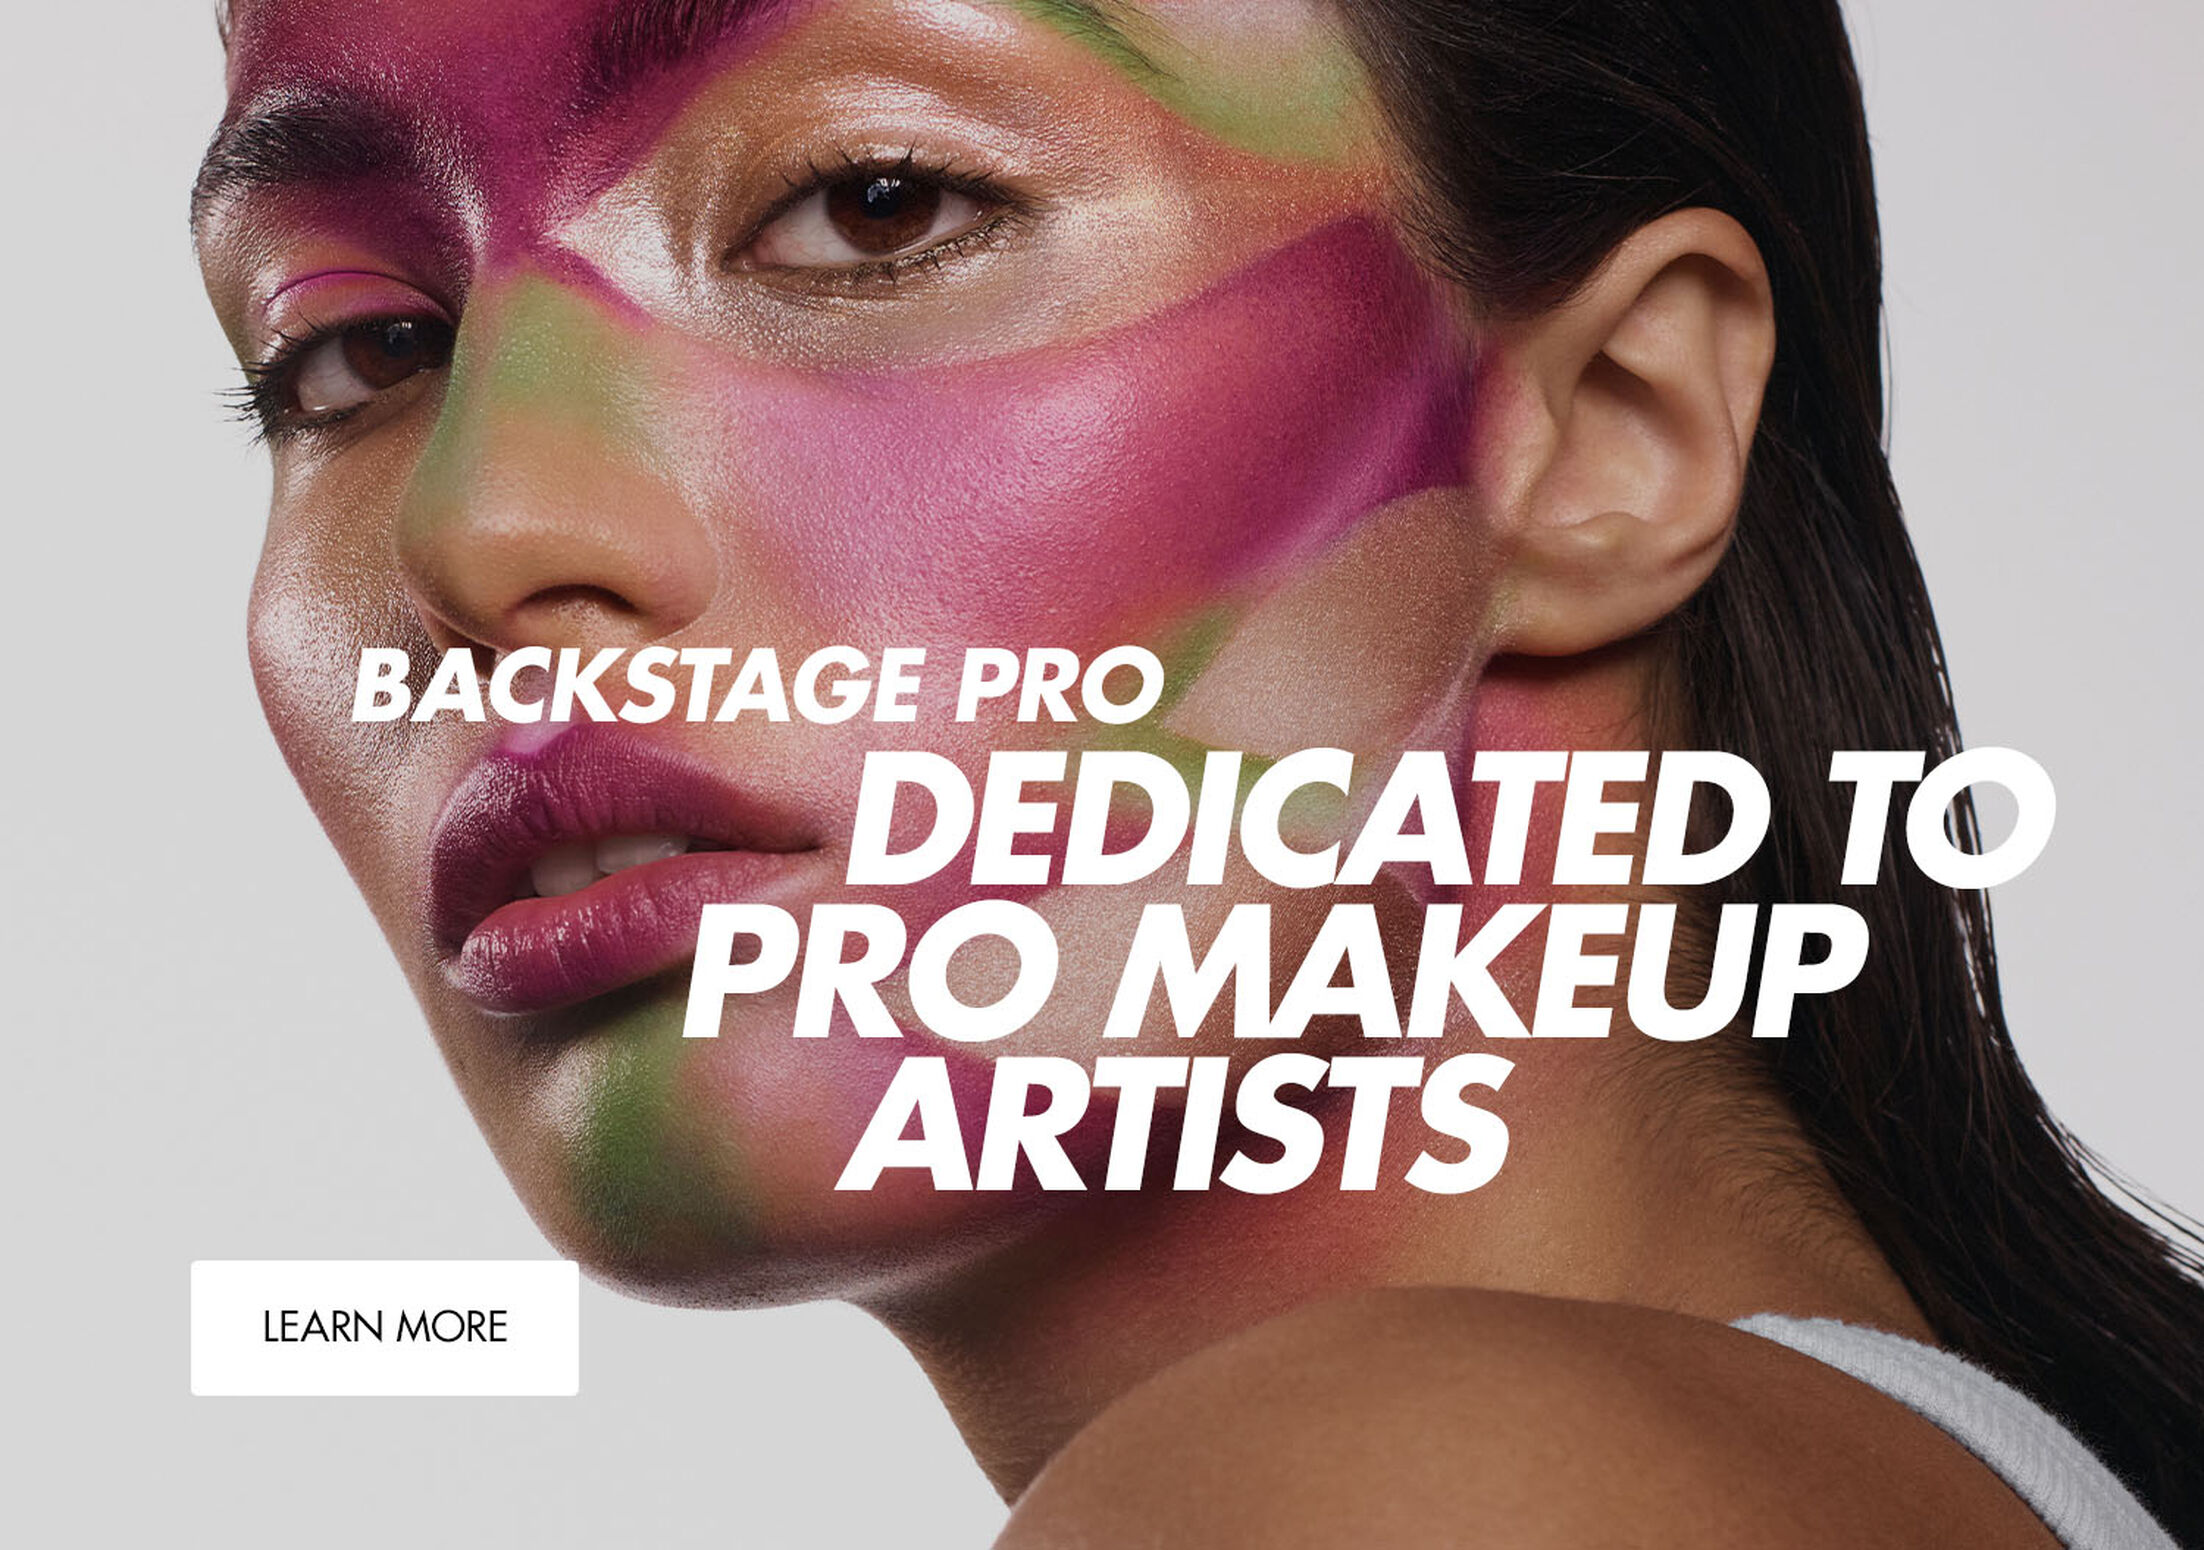 Backstage Pro - Dedicated to Pro Makeup Artists. Learn More.